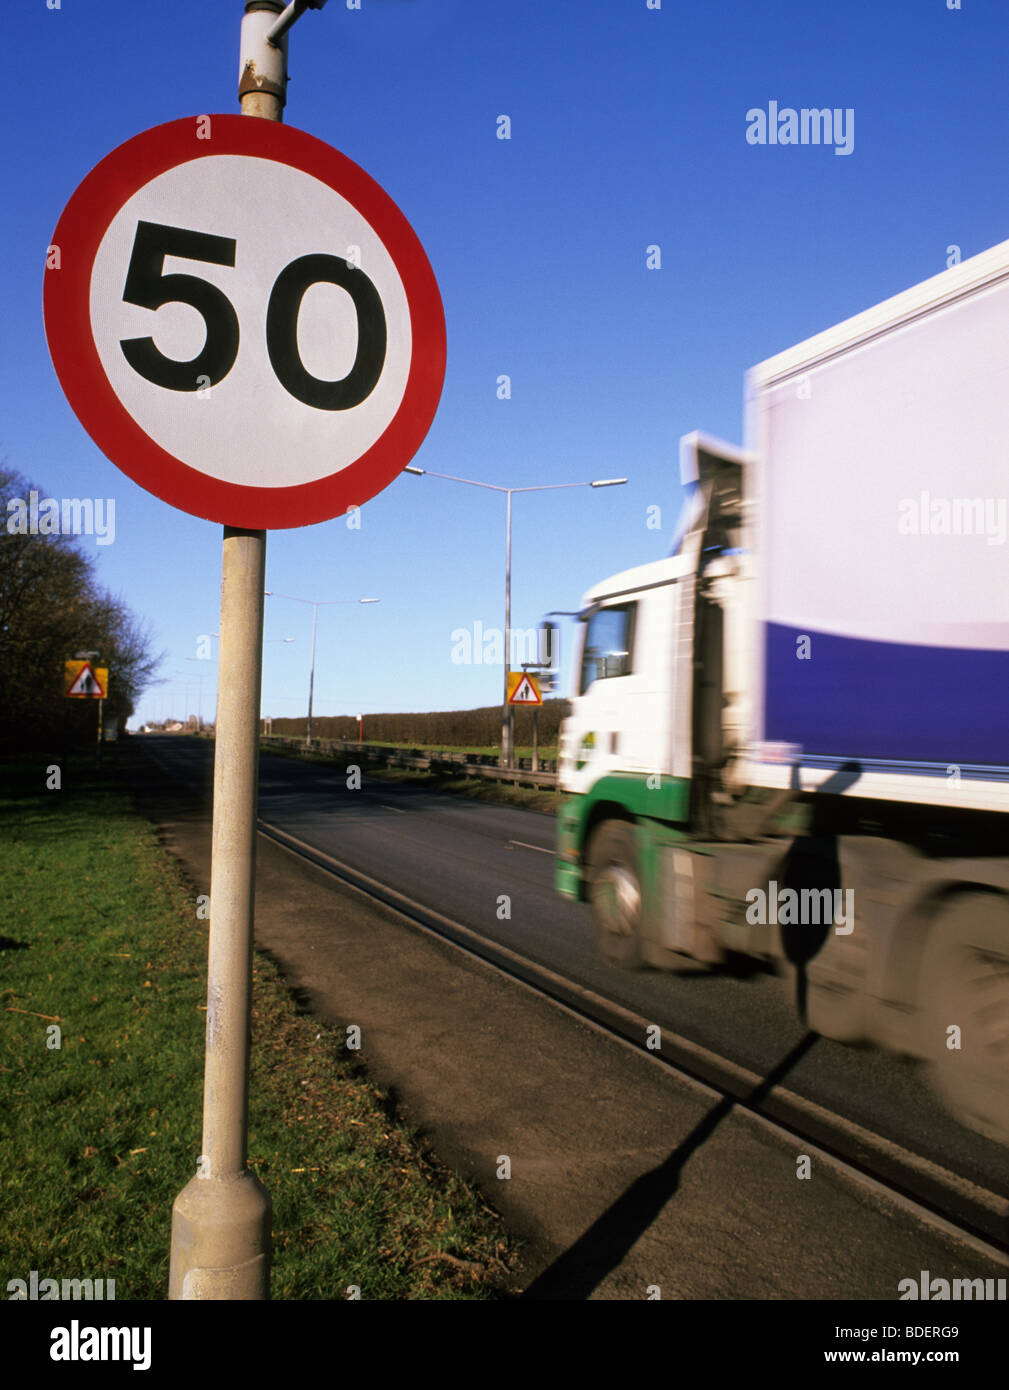 lorry passing 50 miles per hour speed limit warning sign on road in leeds yorkshire uk Stock Photo